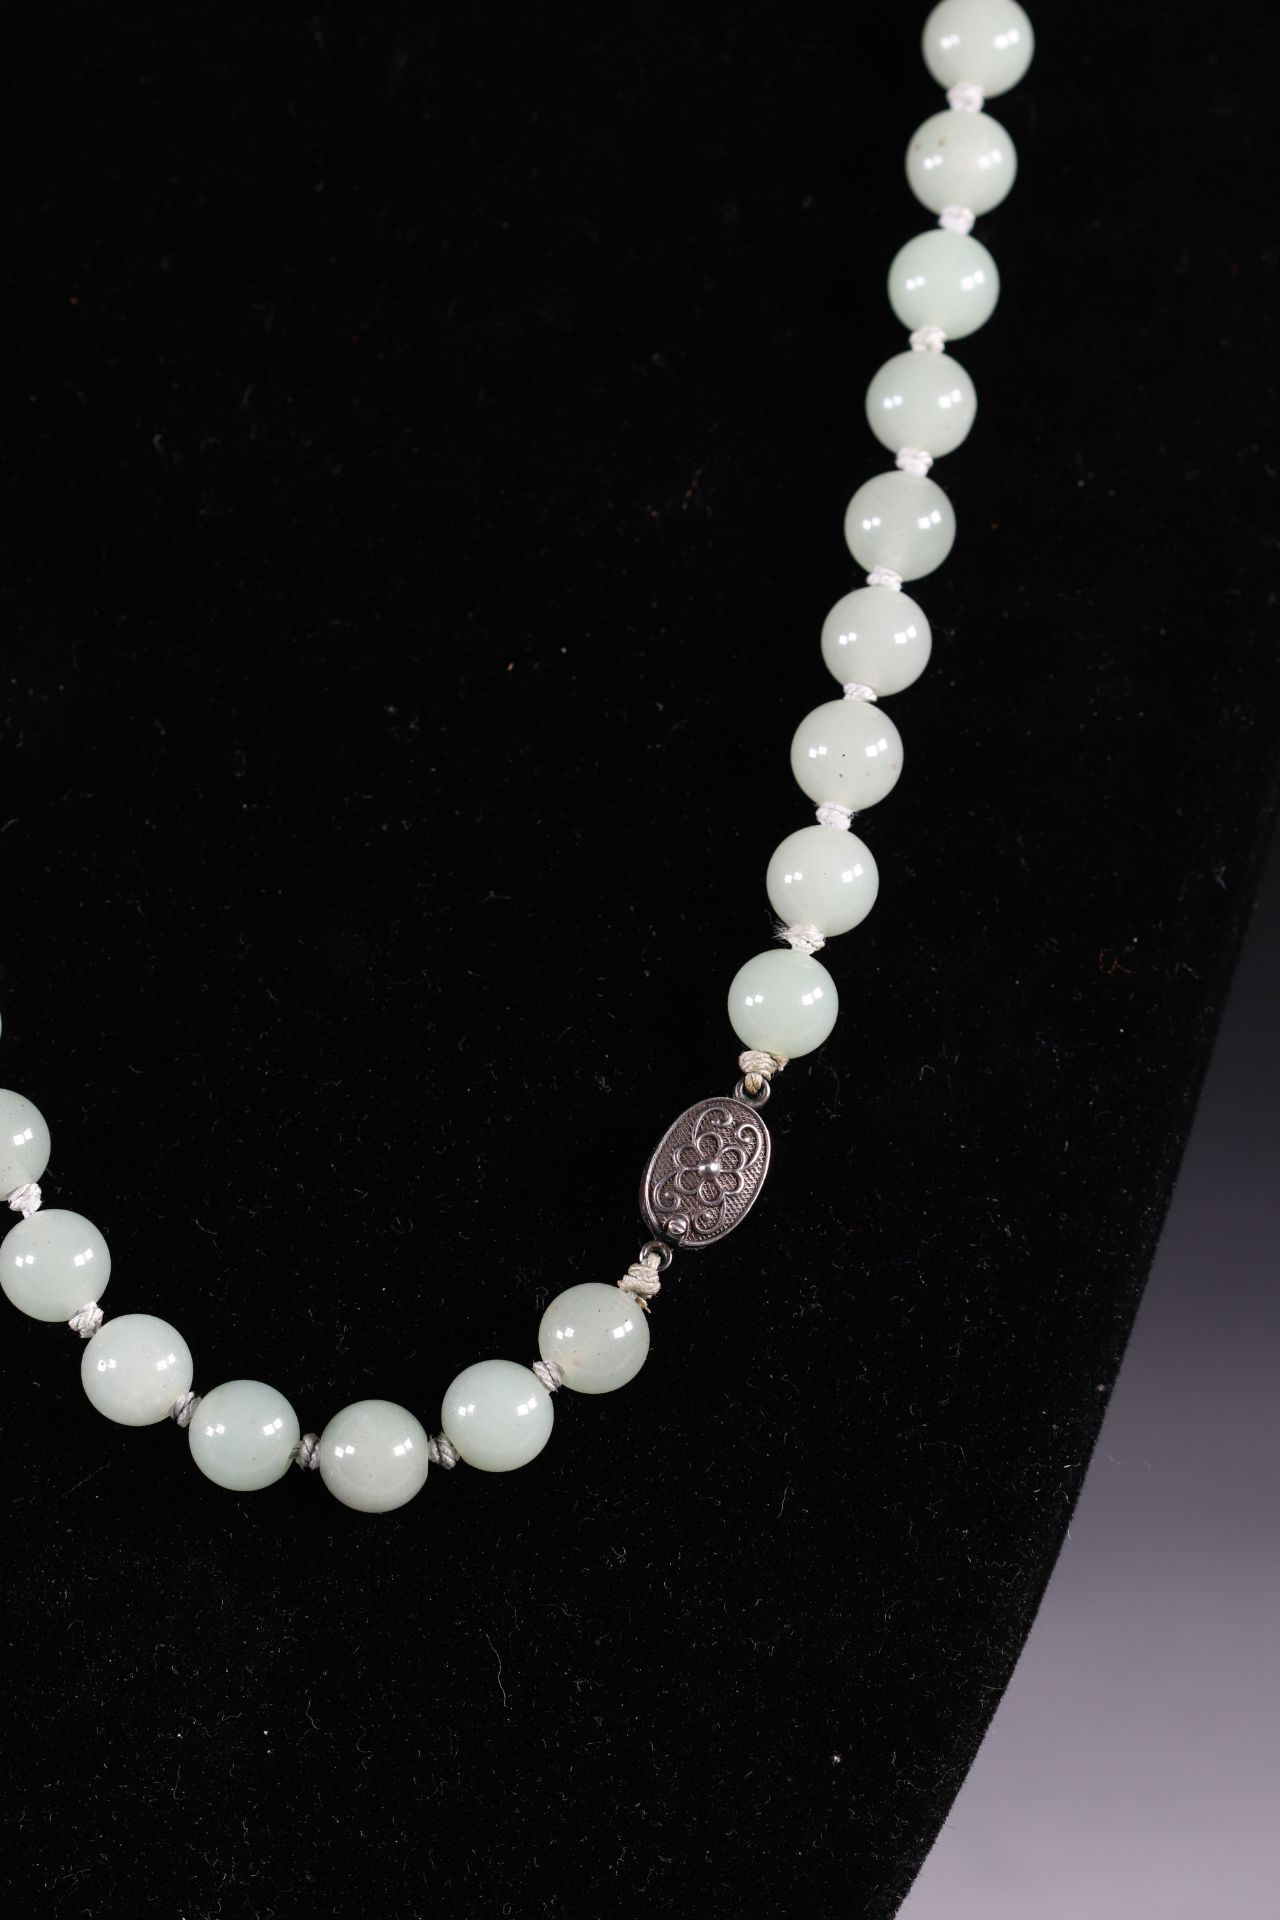 Green jade pearl necklace, hallmarked silver frame. Mid-20th century China. - Image 3 of 4